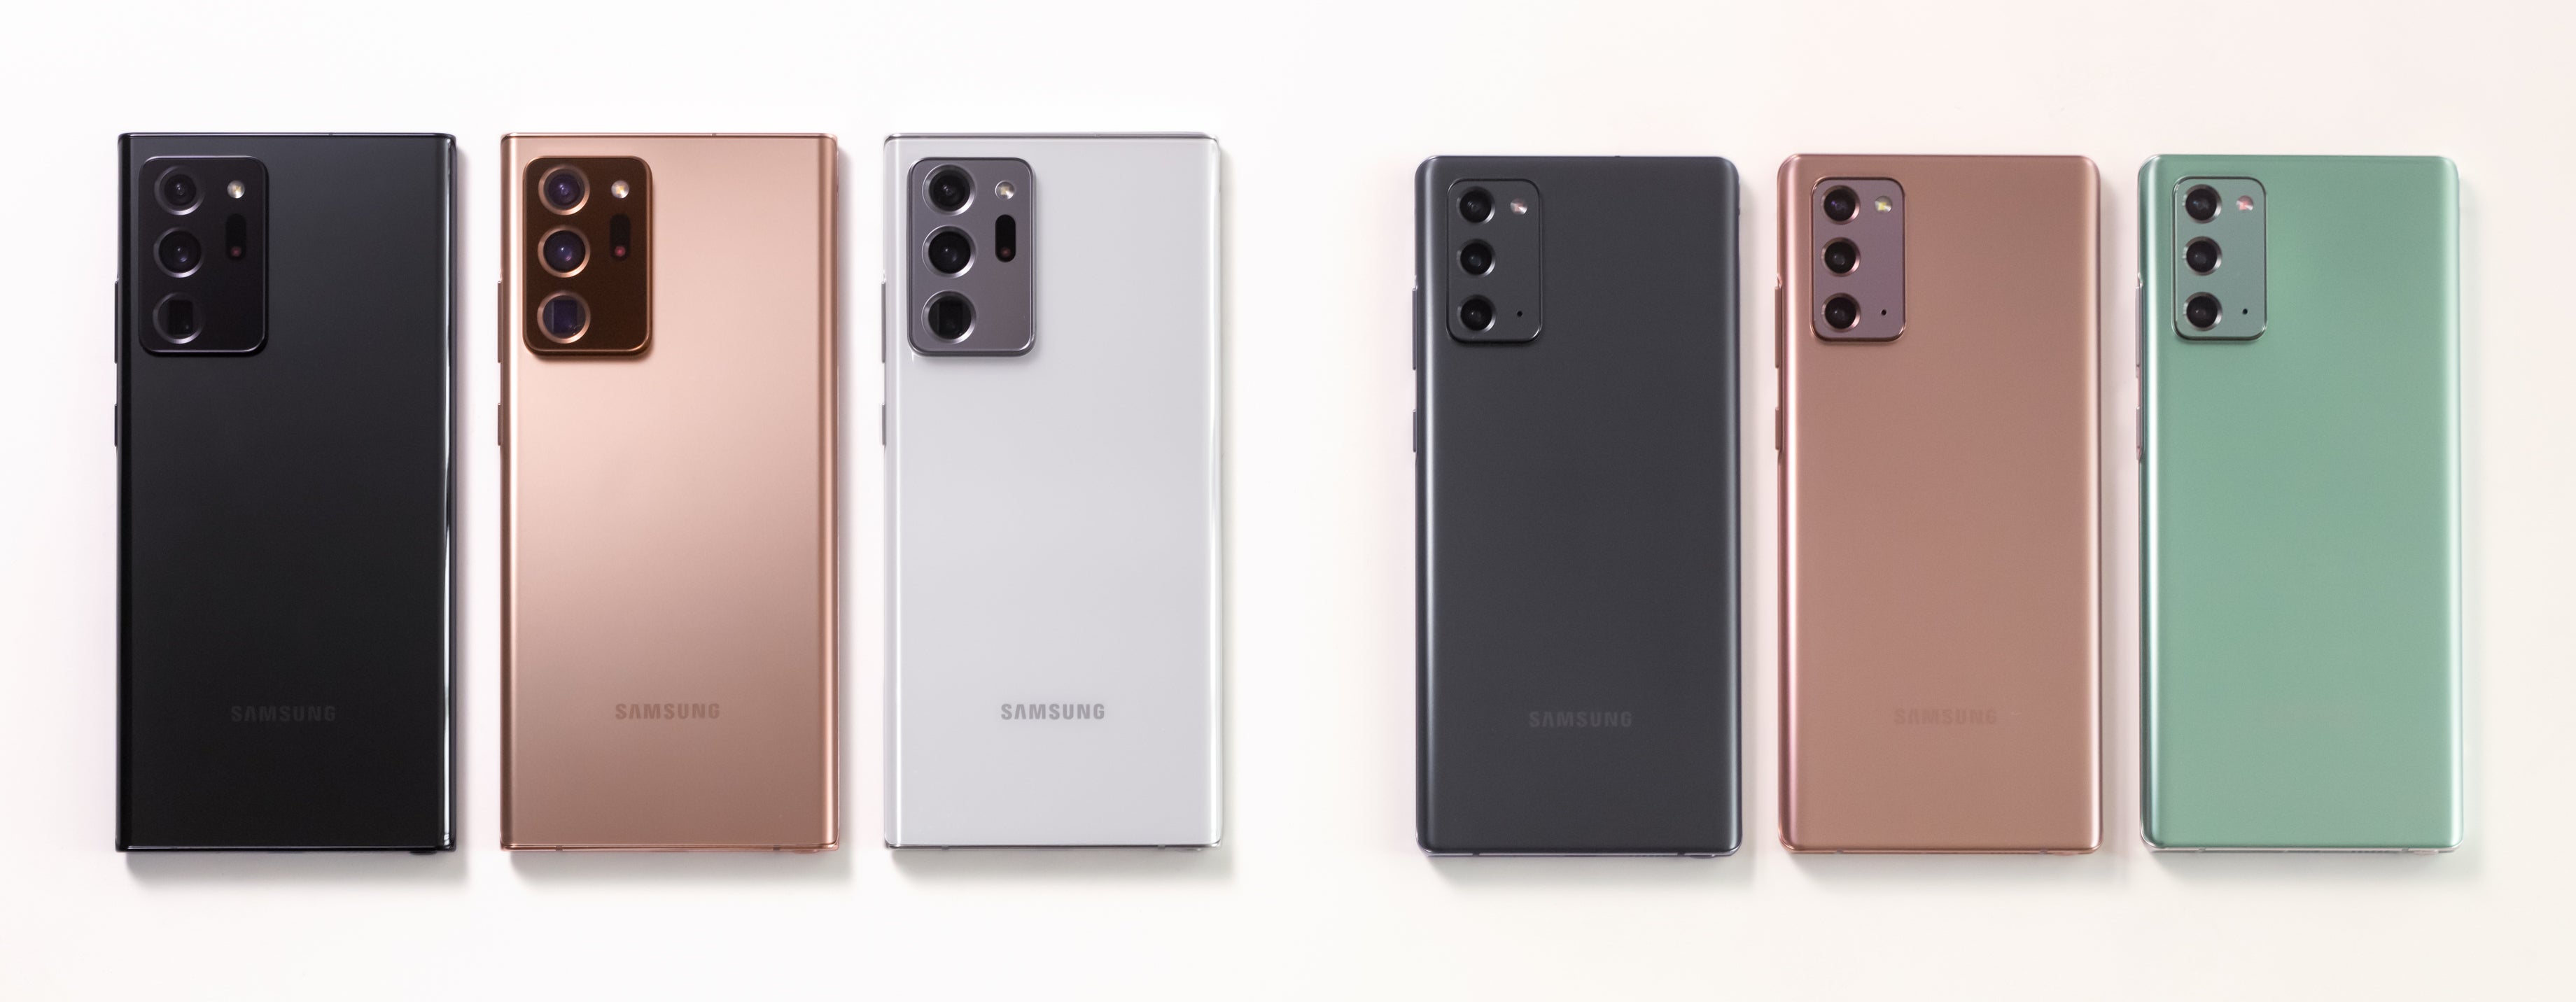 Note 20 Ultra and Note 20 colors - The Galaxy Note 20 5G and Galaxy Note 20 Ultra 5G are official: yet again, the next big thing